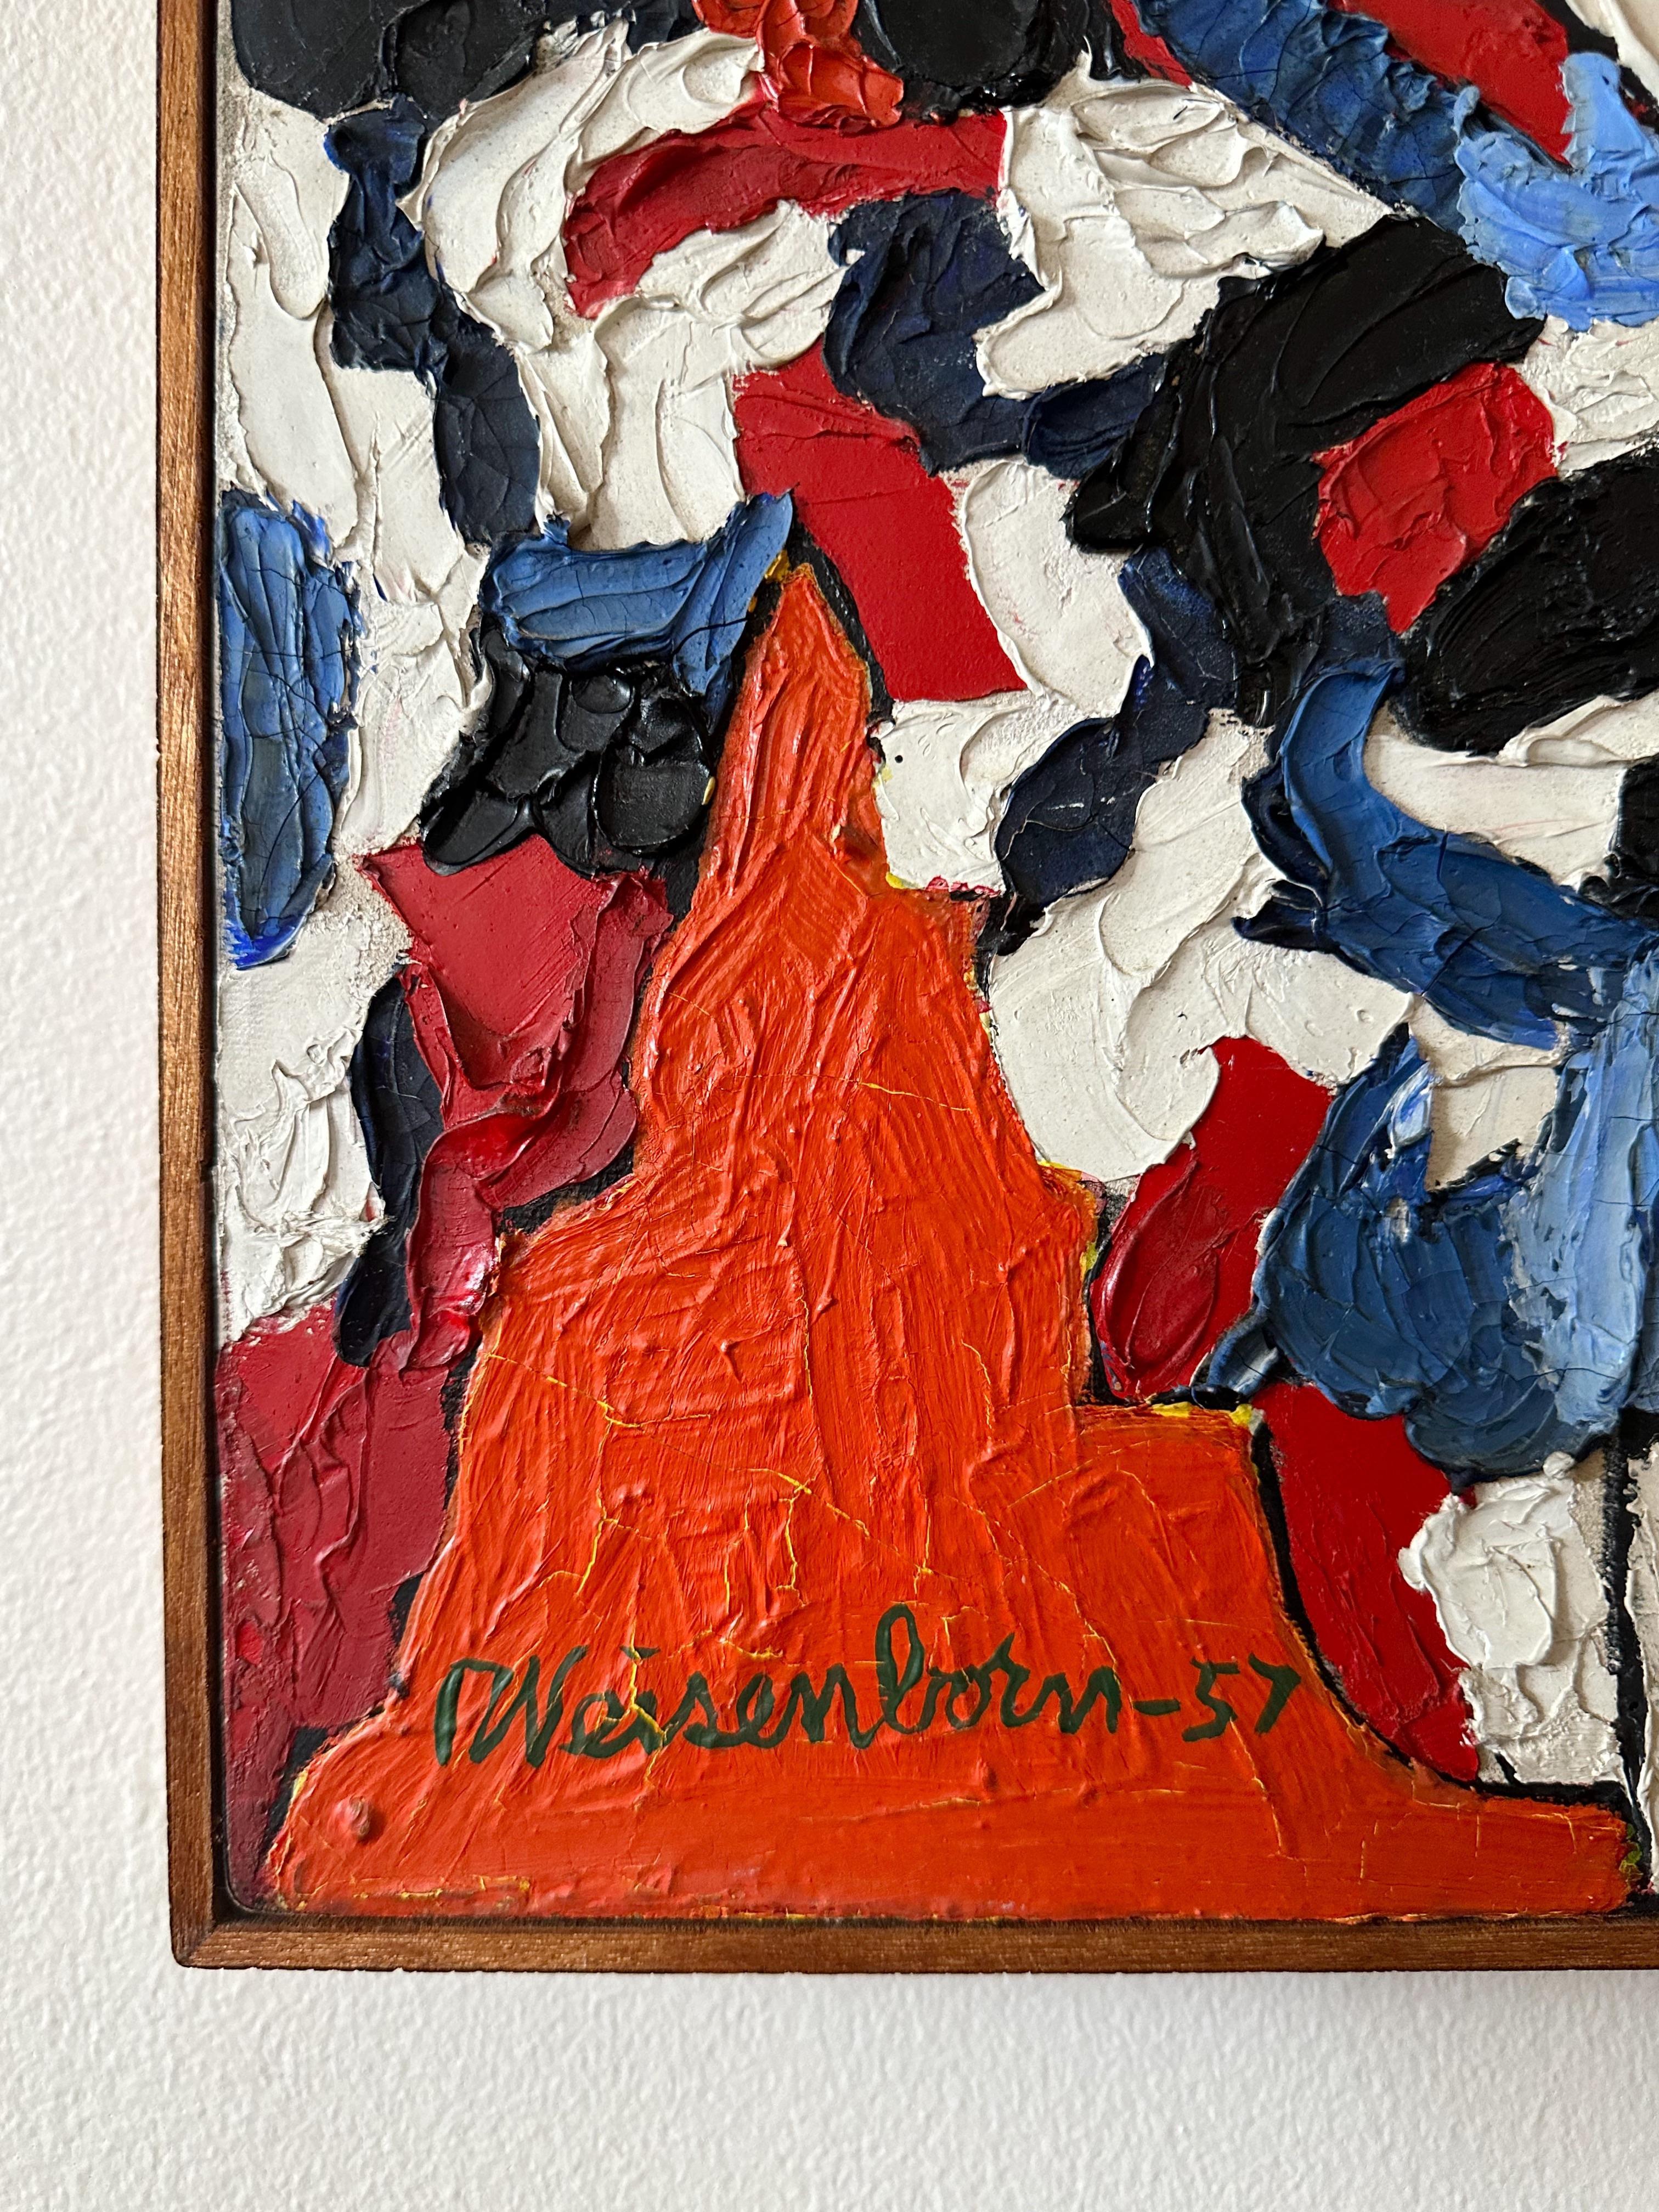 
Rudolph Weisenborn (1879-1974) Colorful abstract painting in heavy impasto oil on canvas by renowned Chicago artist Rudolph Weisenborn. Signed on bottom right front Wesisenborn '57. In original wood frame. 

BORN: October 30, 1879[1] Chicago
DIED: